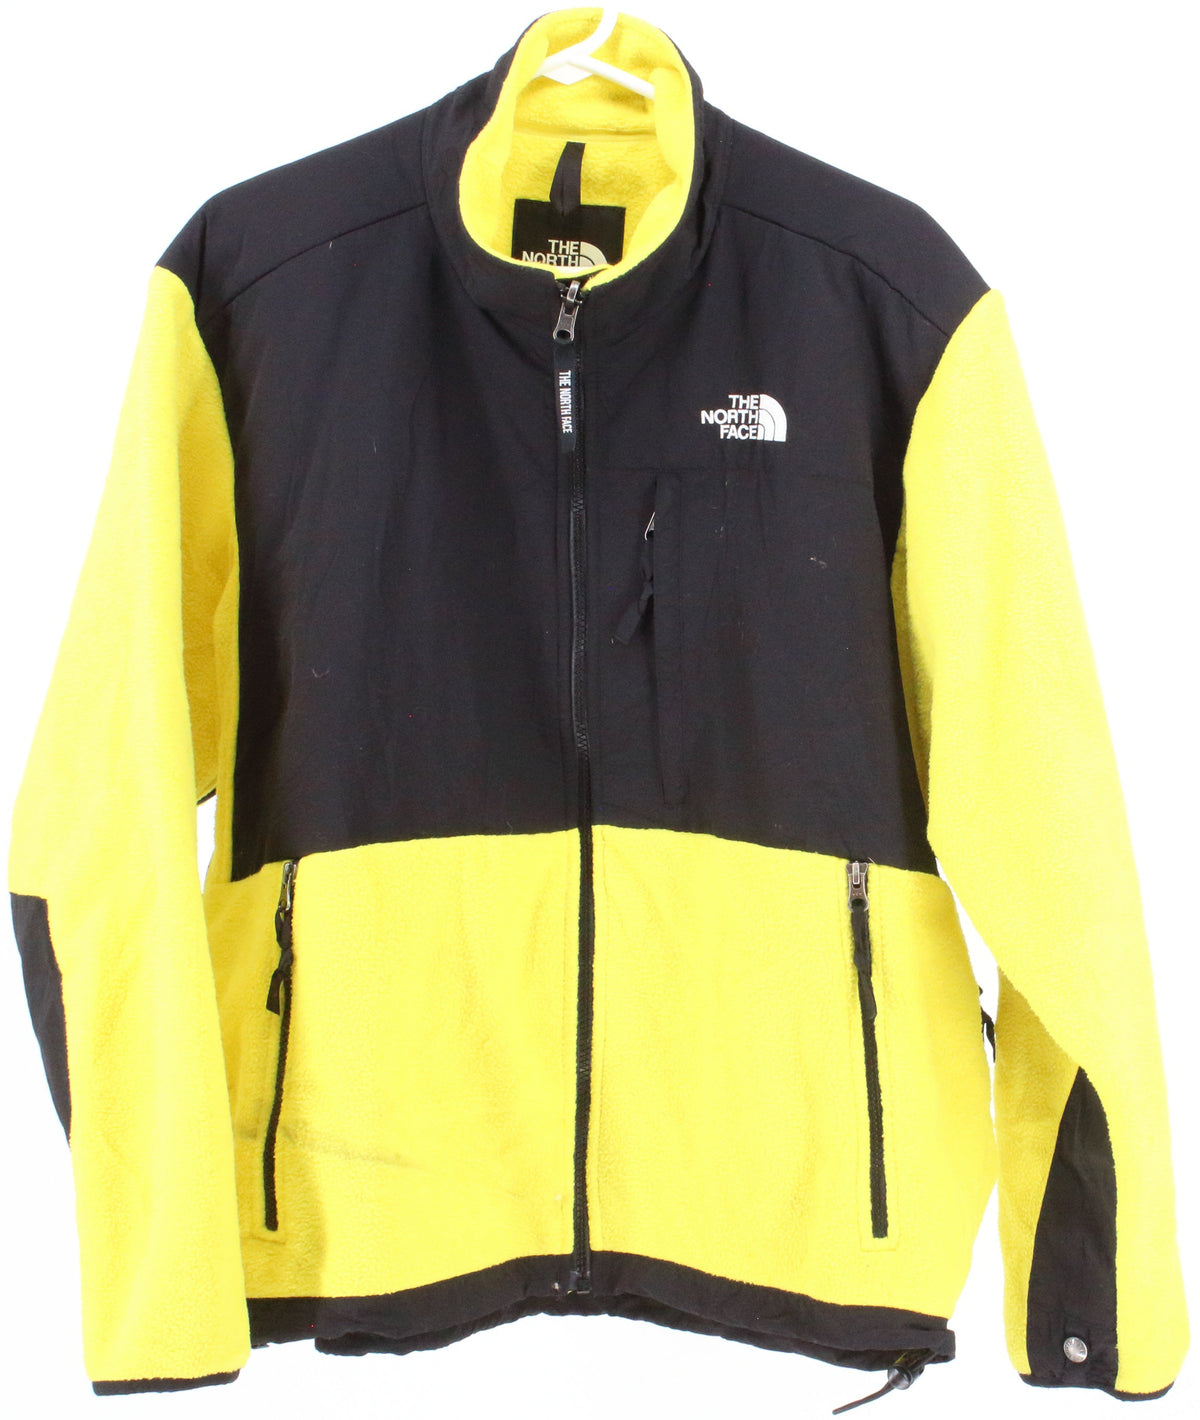 The North Face Yellow and Black Women's Fleece